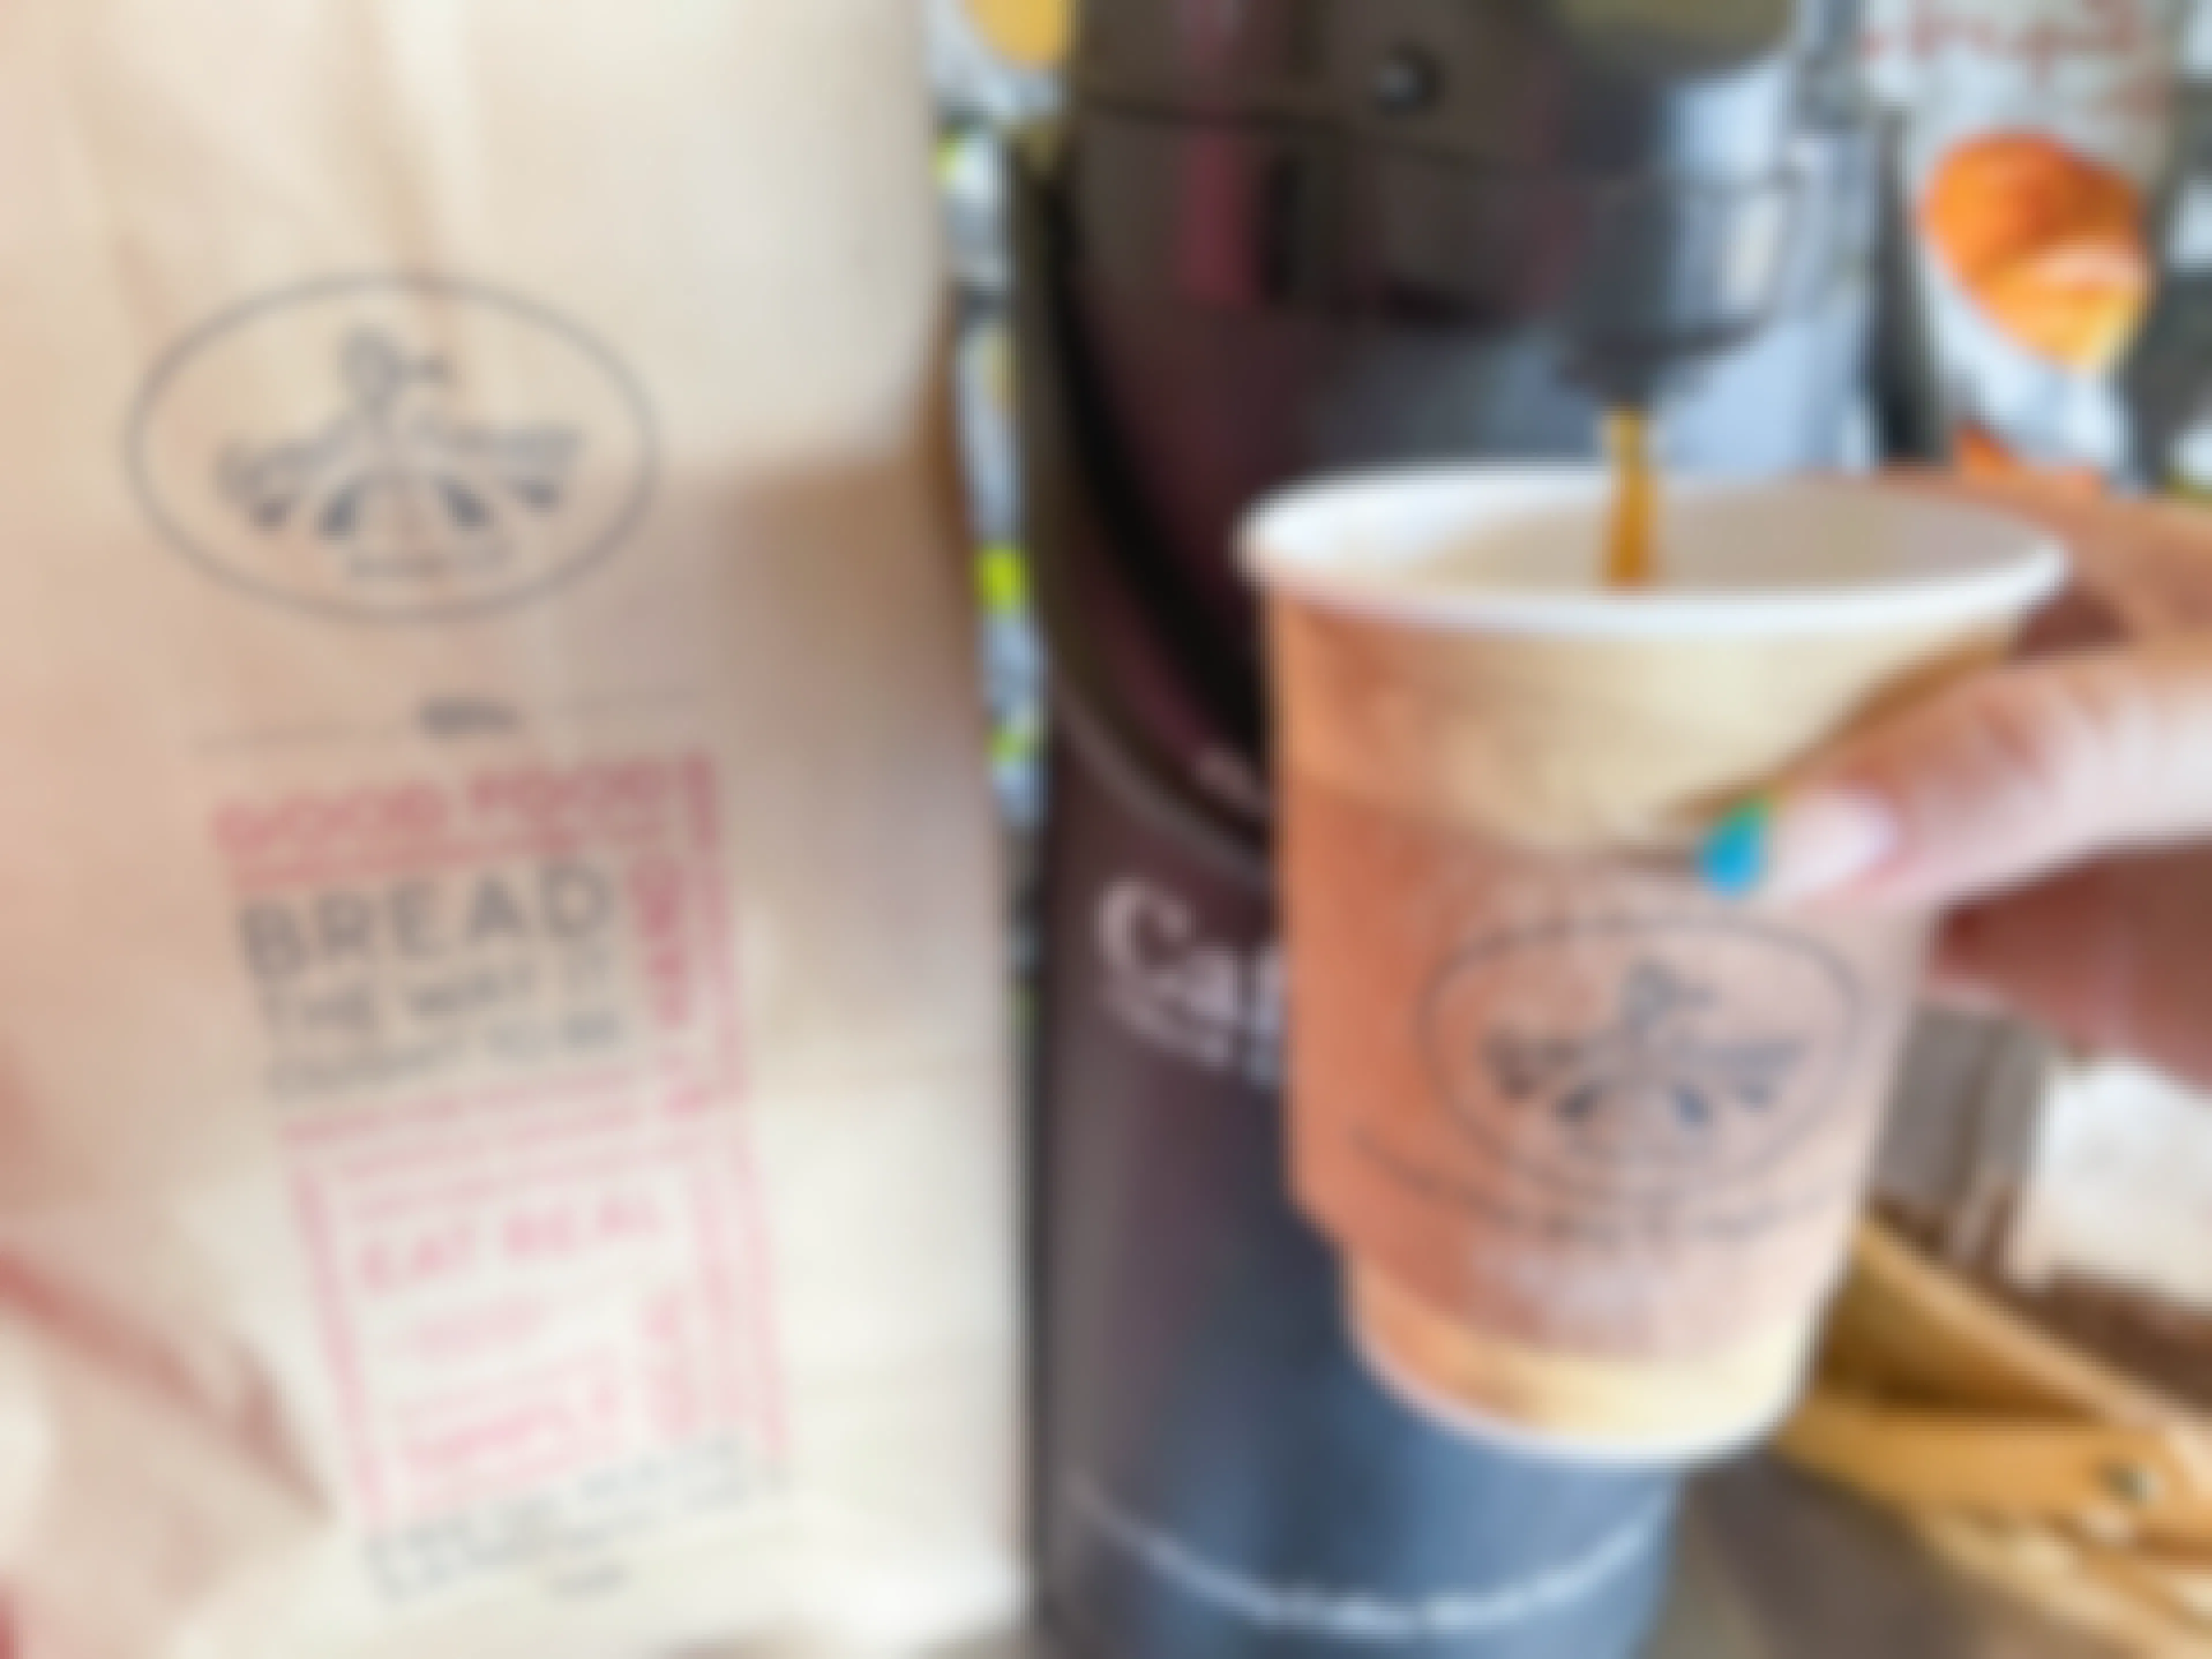 Unlimited Soda & Coffee Subscriptions That Are Super Cheap or Free